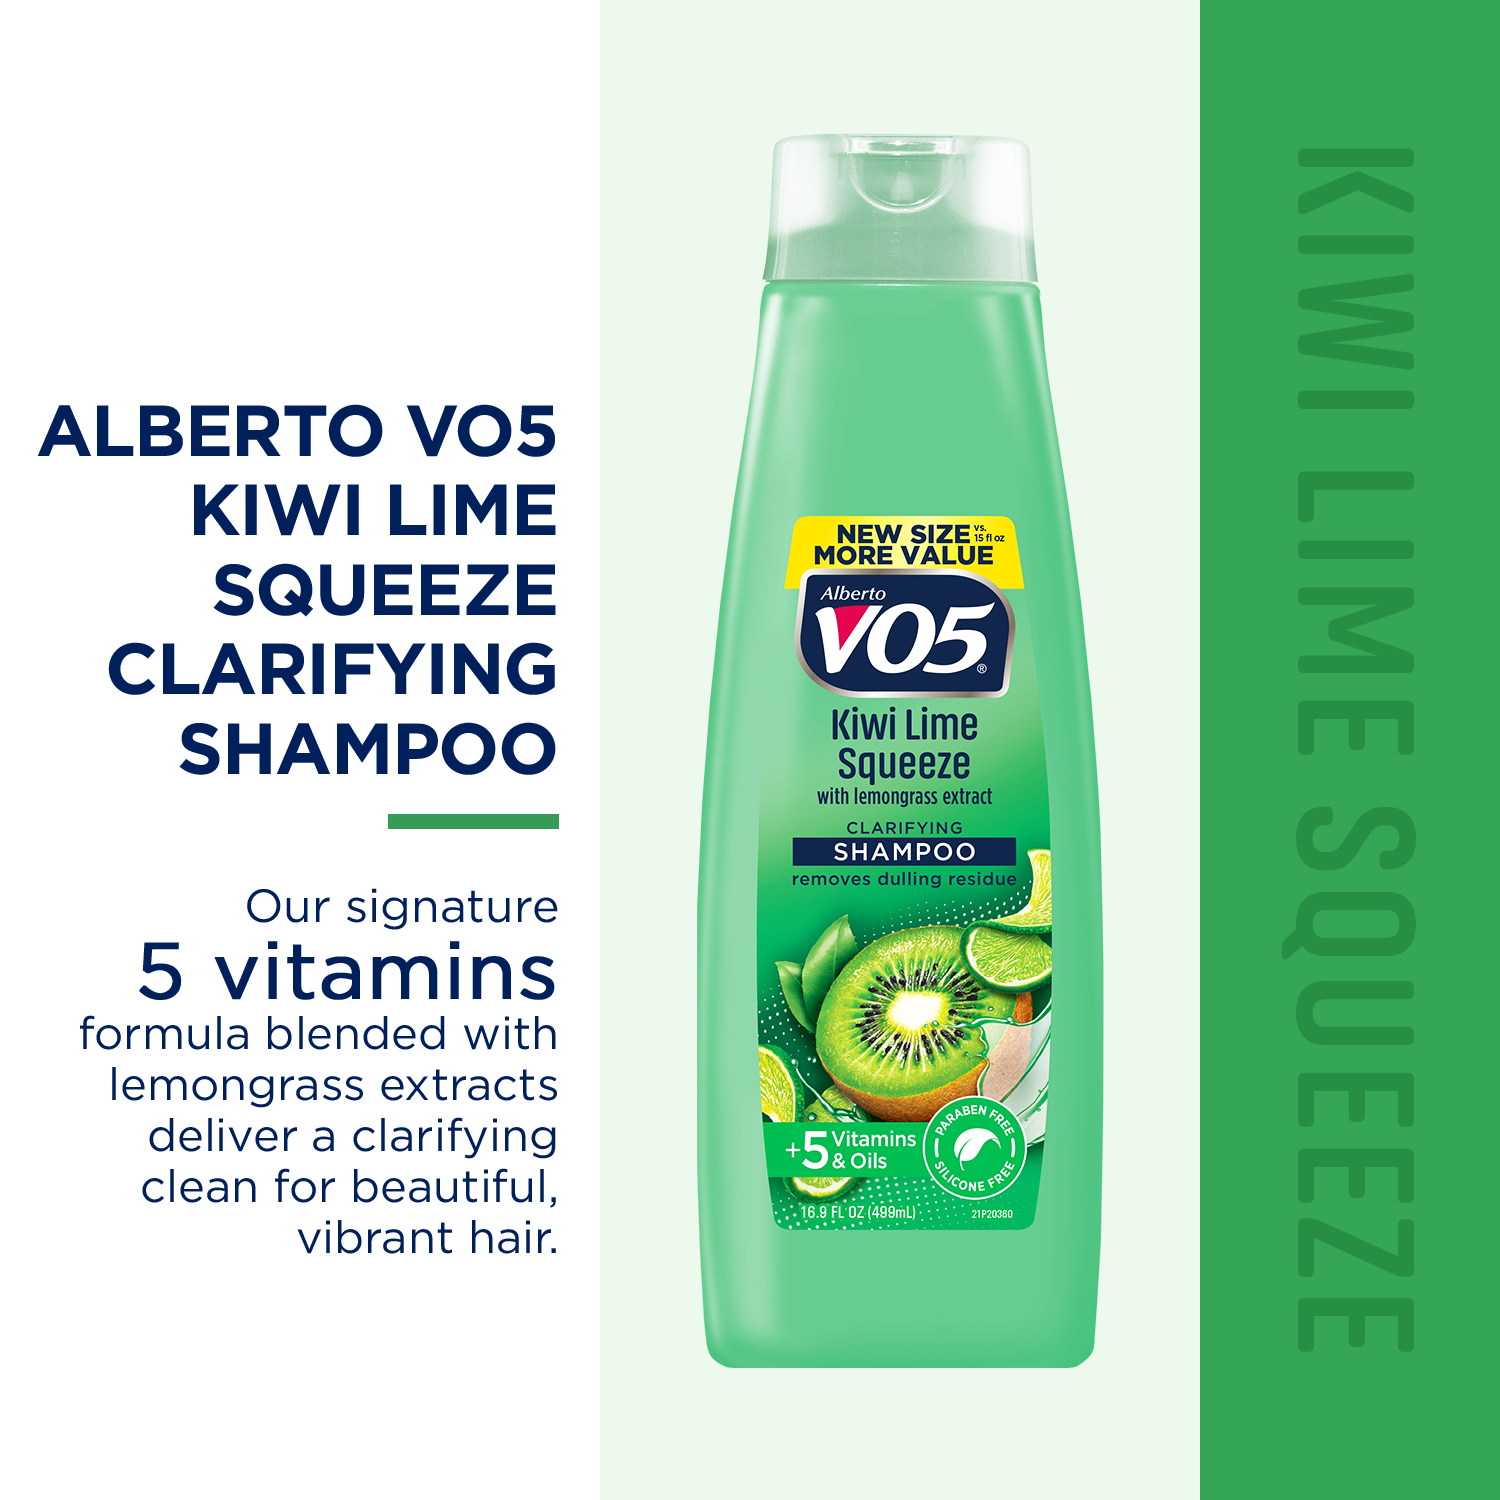 Alberto VO5 Kiwi Lime Squeeze Clarifying Shampoo with Vitamin E & C, for All Hair Types, 16.9 fl oz - image 3 of 6